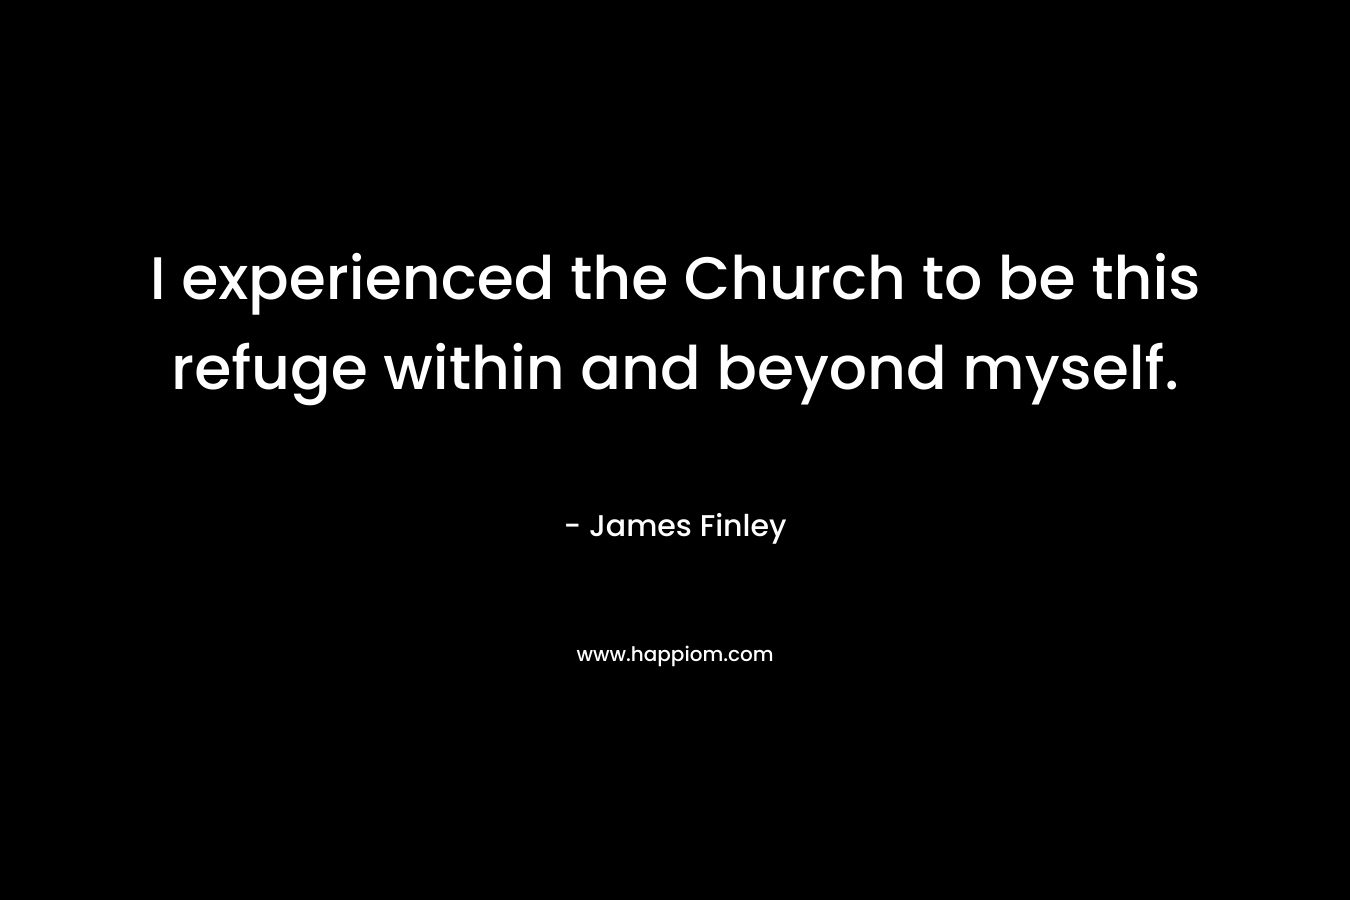 I experienced the Church to be this refuge within and beyond myself. – James Finley